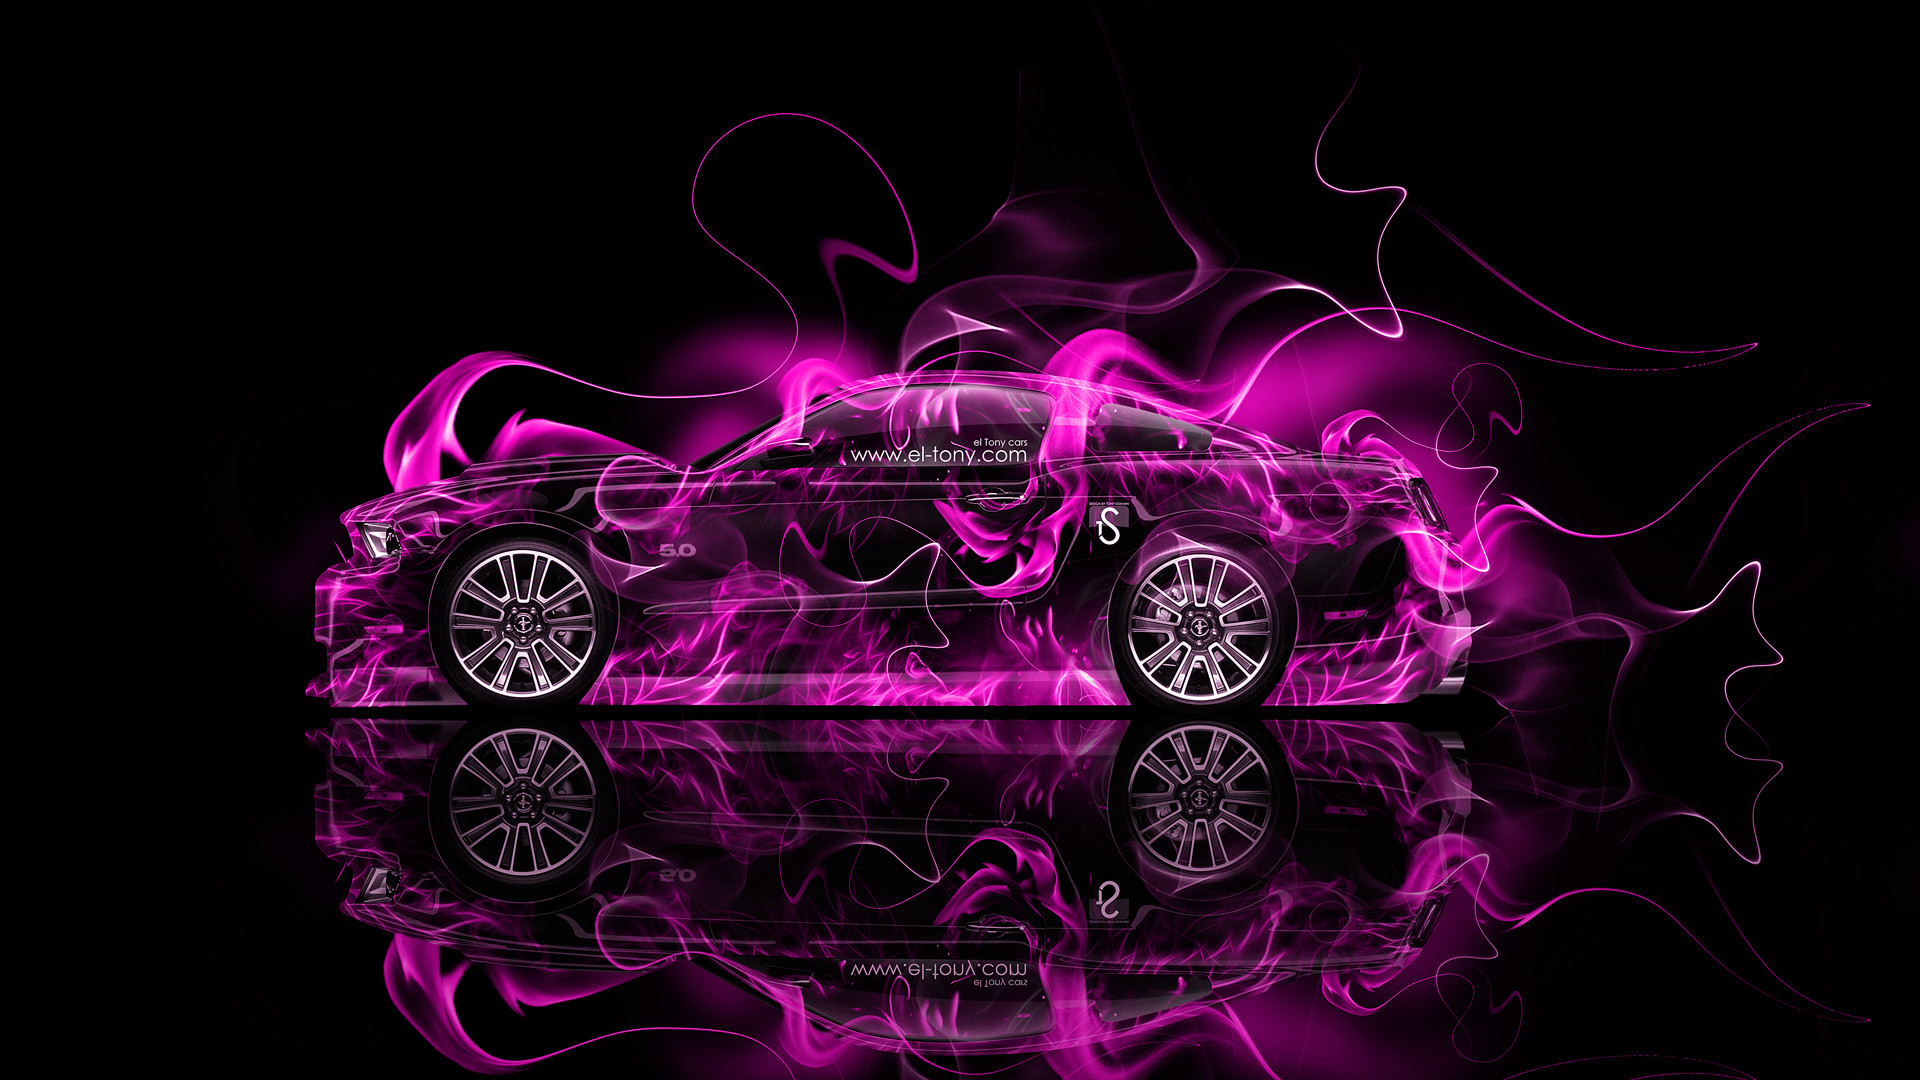 1920x1080 Pink And Black Ford Wallpaper 25 Cool Wallpaper